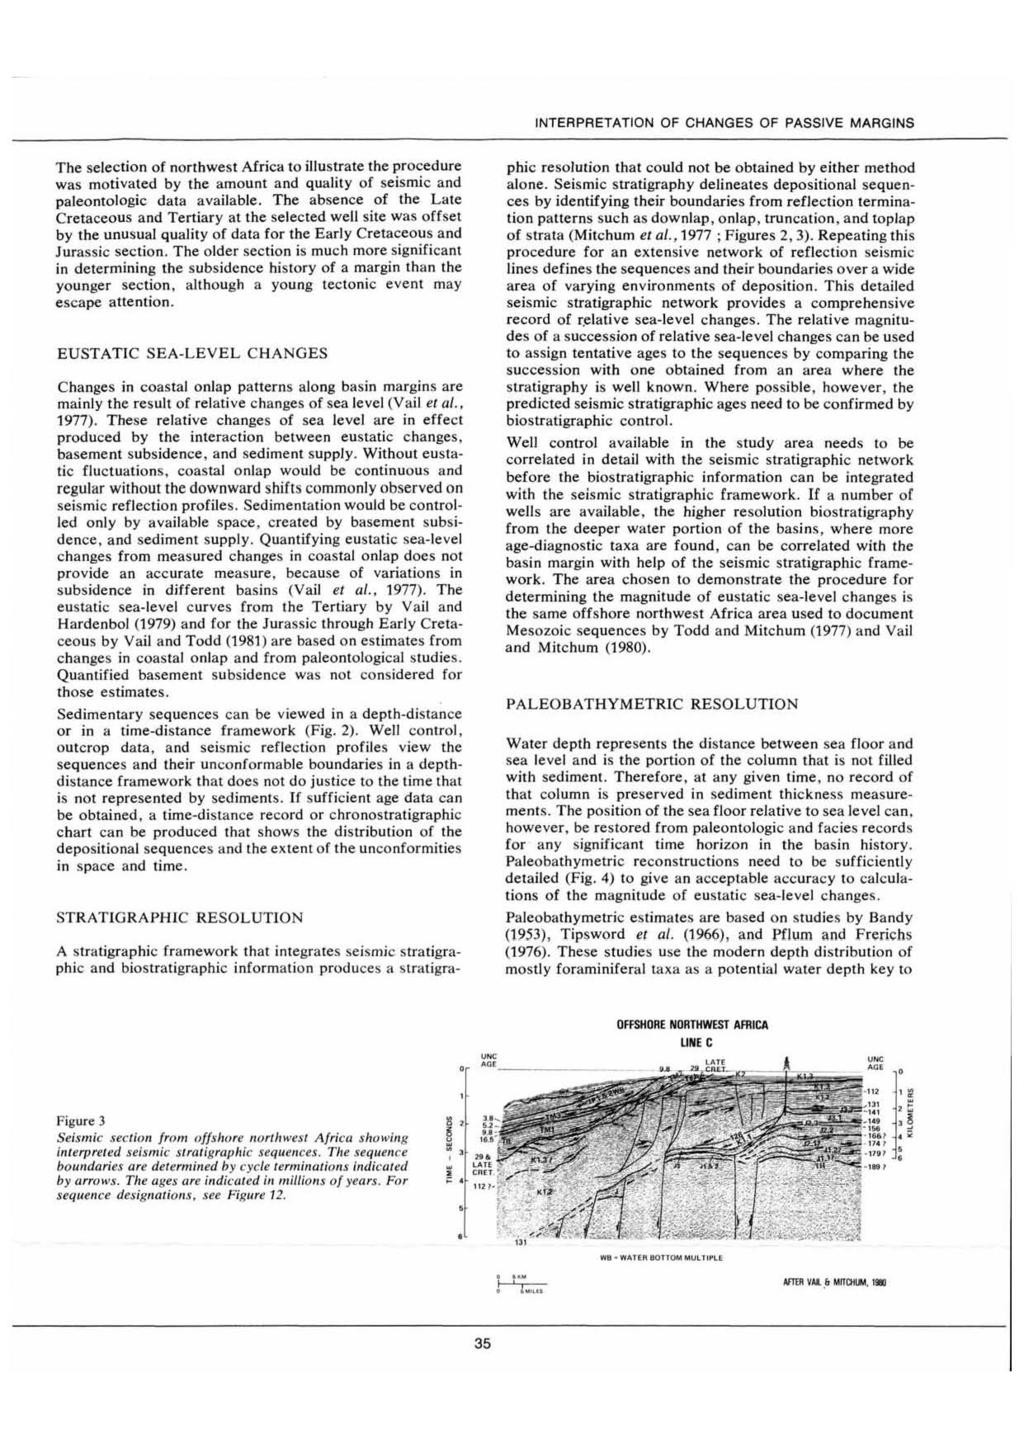 INTERPRETATION OF CHANGES OF PASSIVE MARGINS The selection of northwest Africa to il[ustrate the procedure was motivated by the amount and quality of seismic and paleontologie data available.